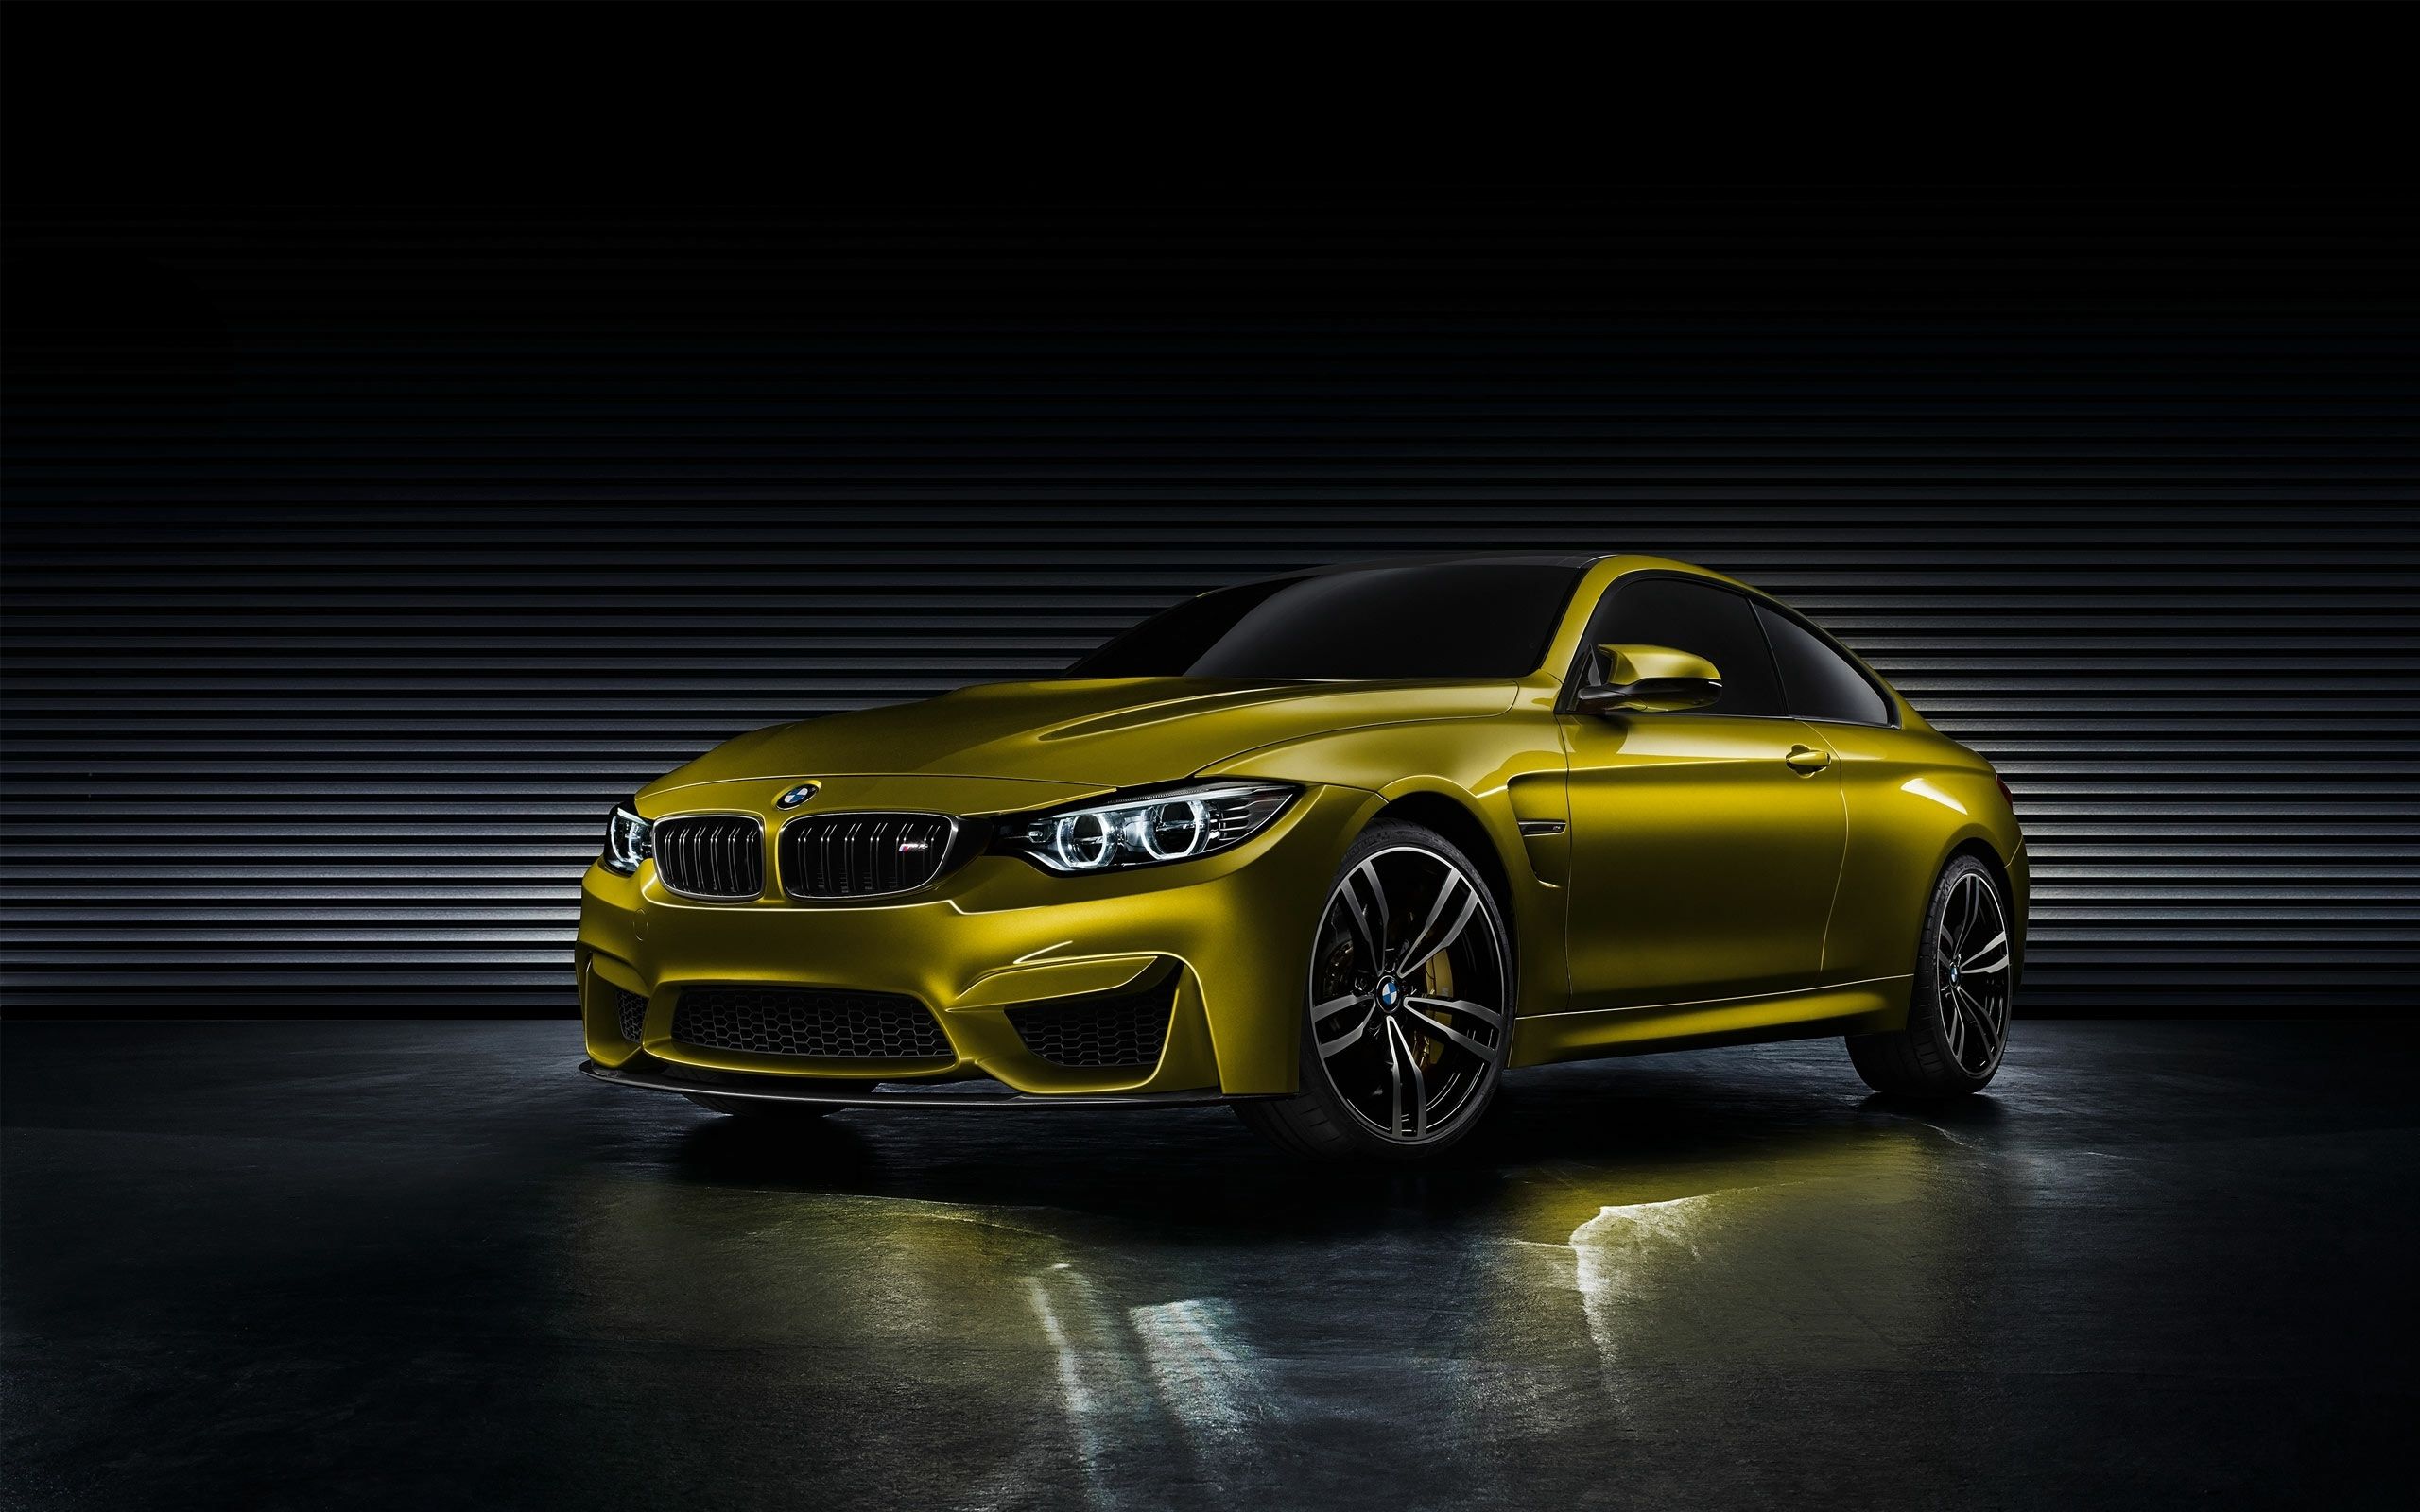 The BMW M4 Concept Coupe is a sports car that is designed to be both fast and agile. - BMW